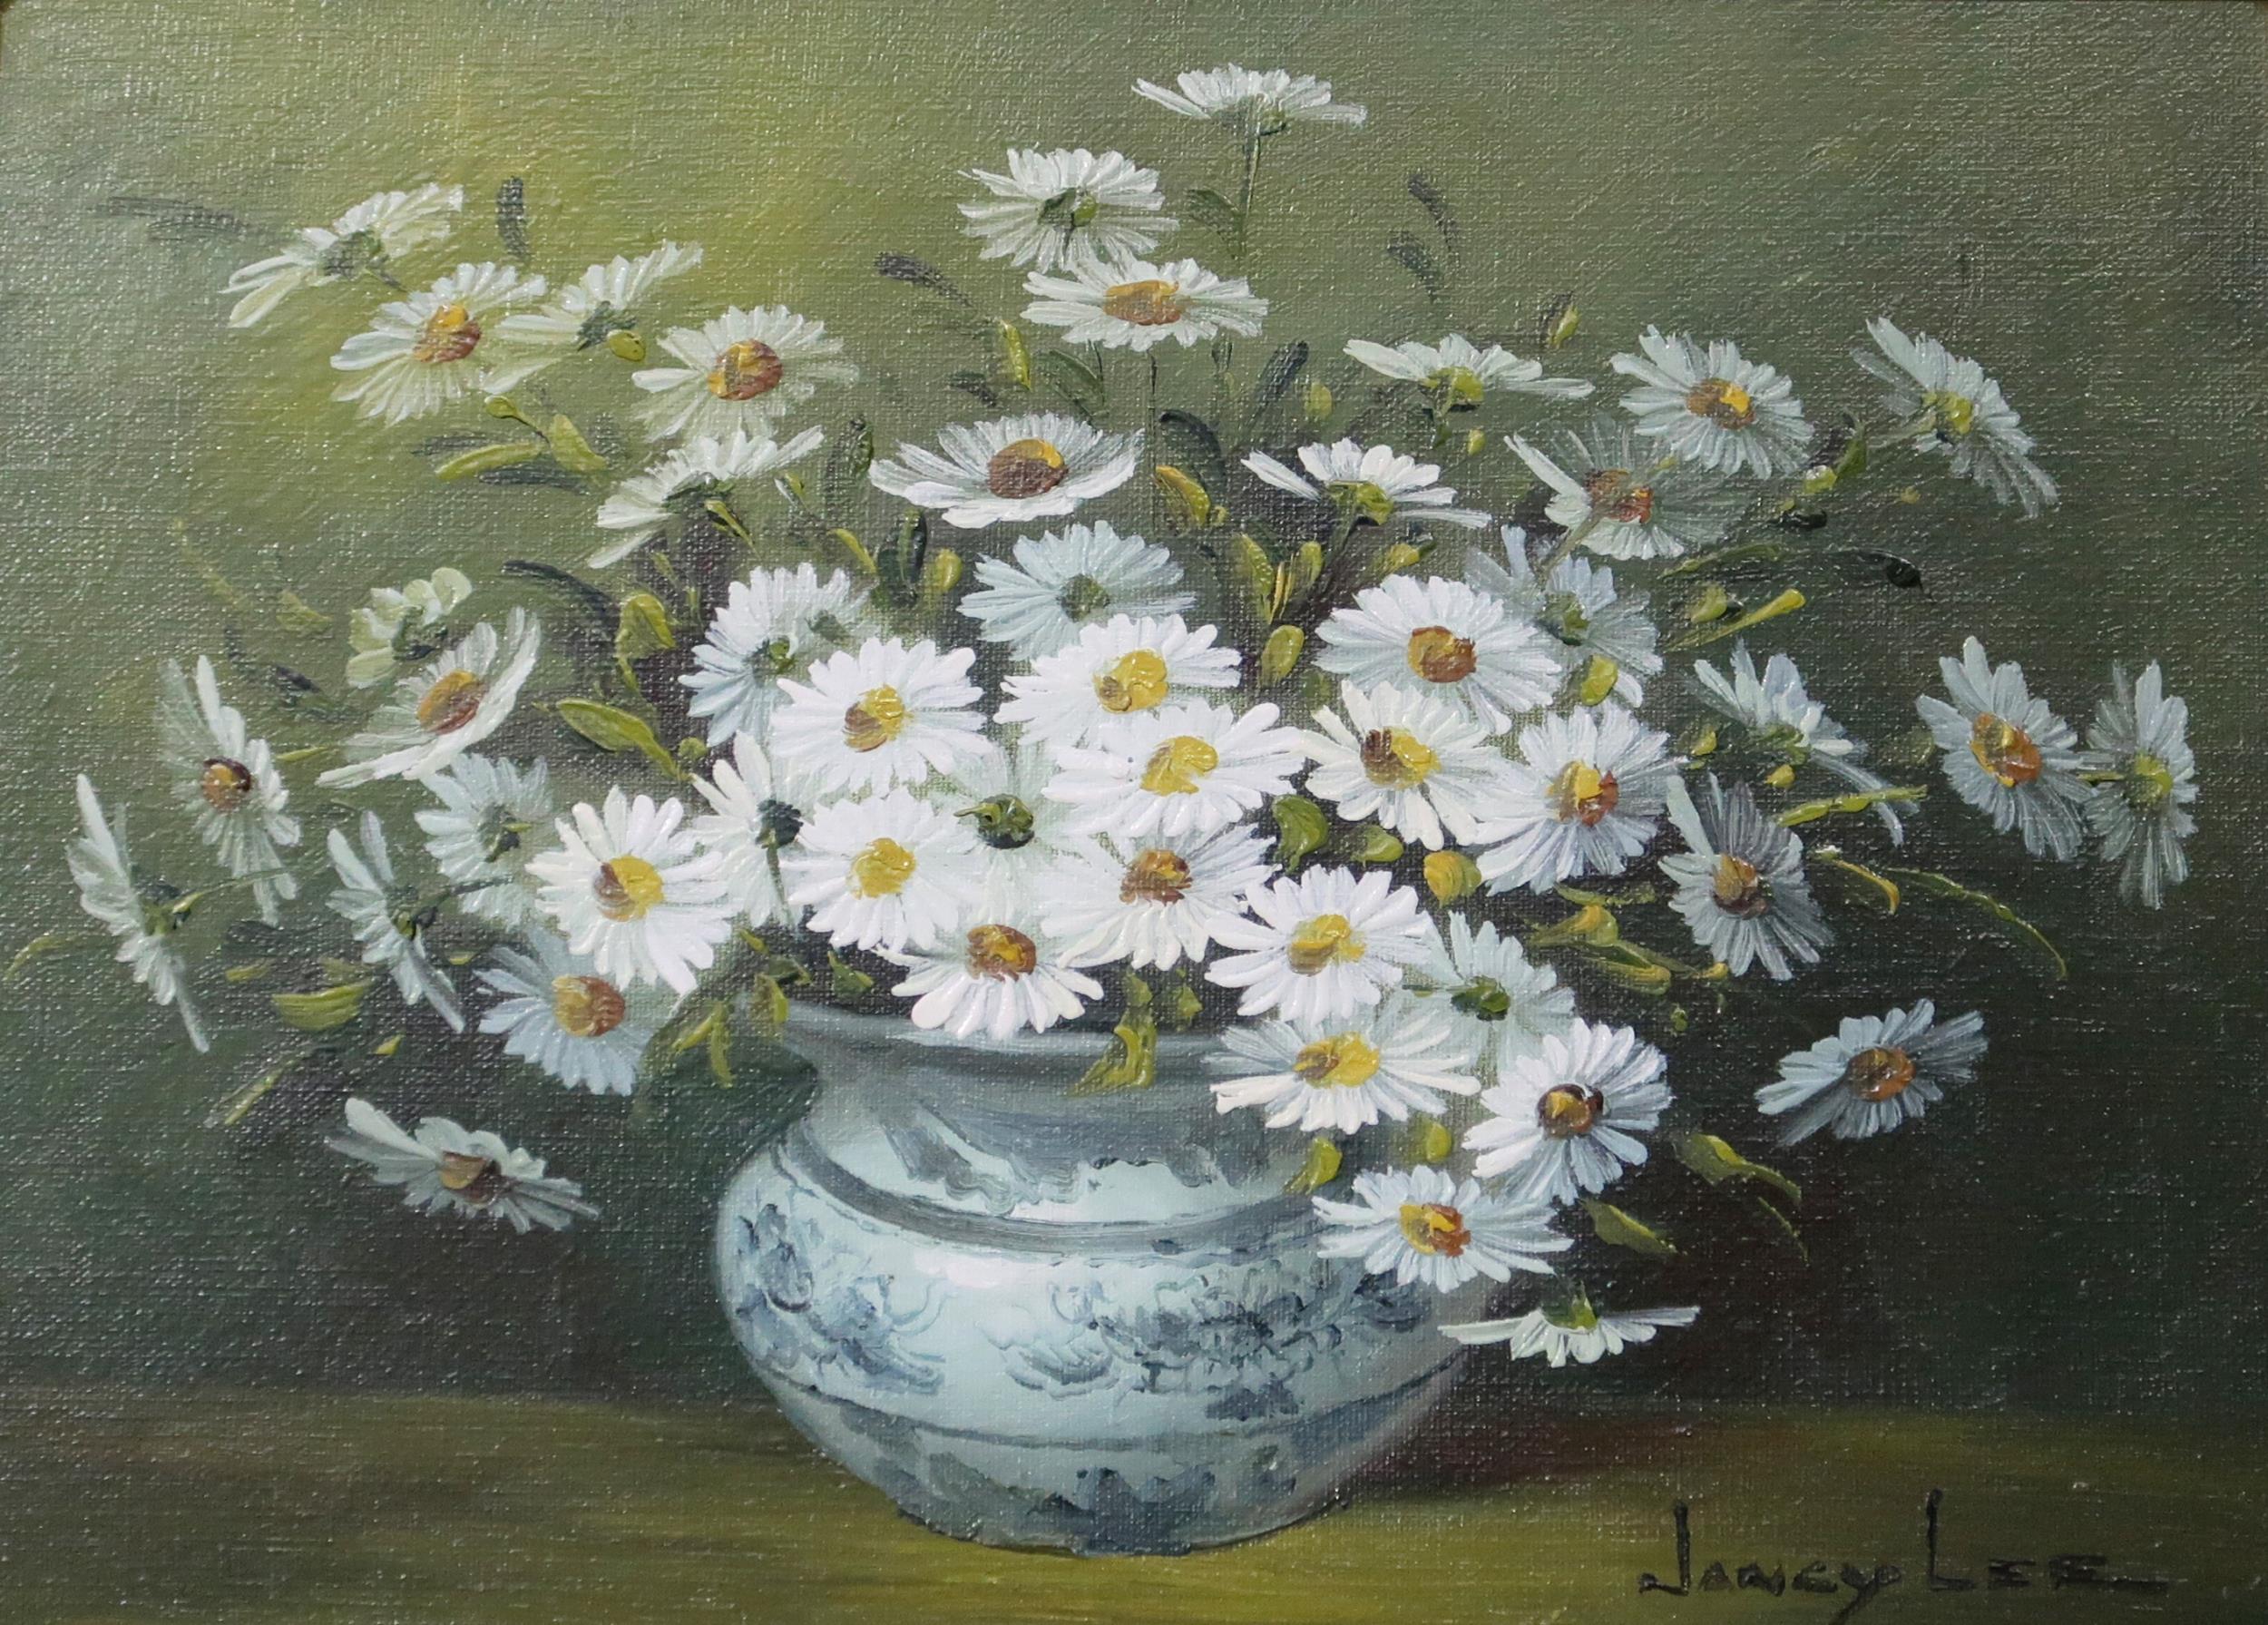 NANCY LEE (AMERICAN 20th CENTURY)  DAISIES  Oil on canvas, signed lower right, 29 x 39cm   Condition